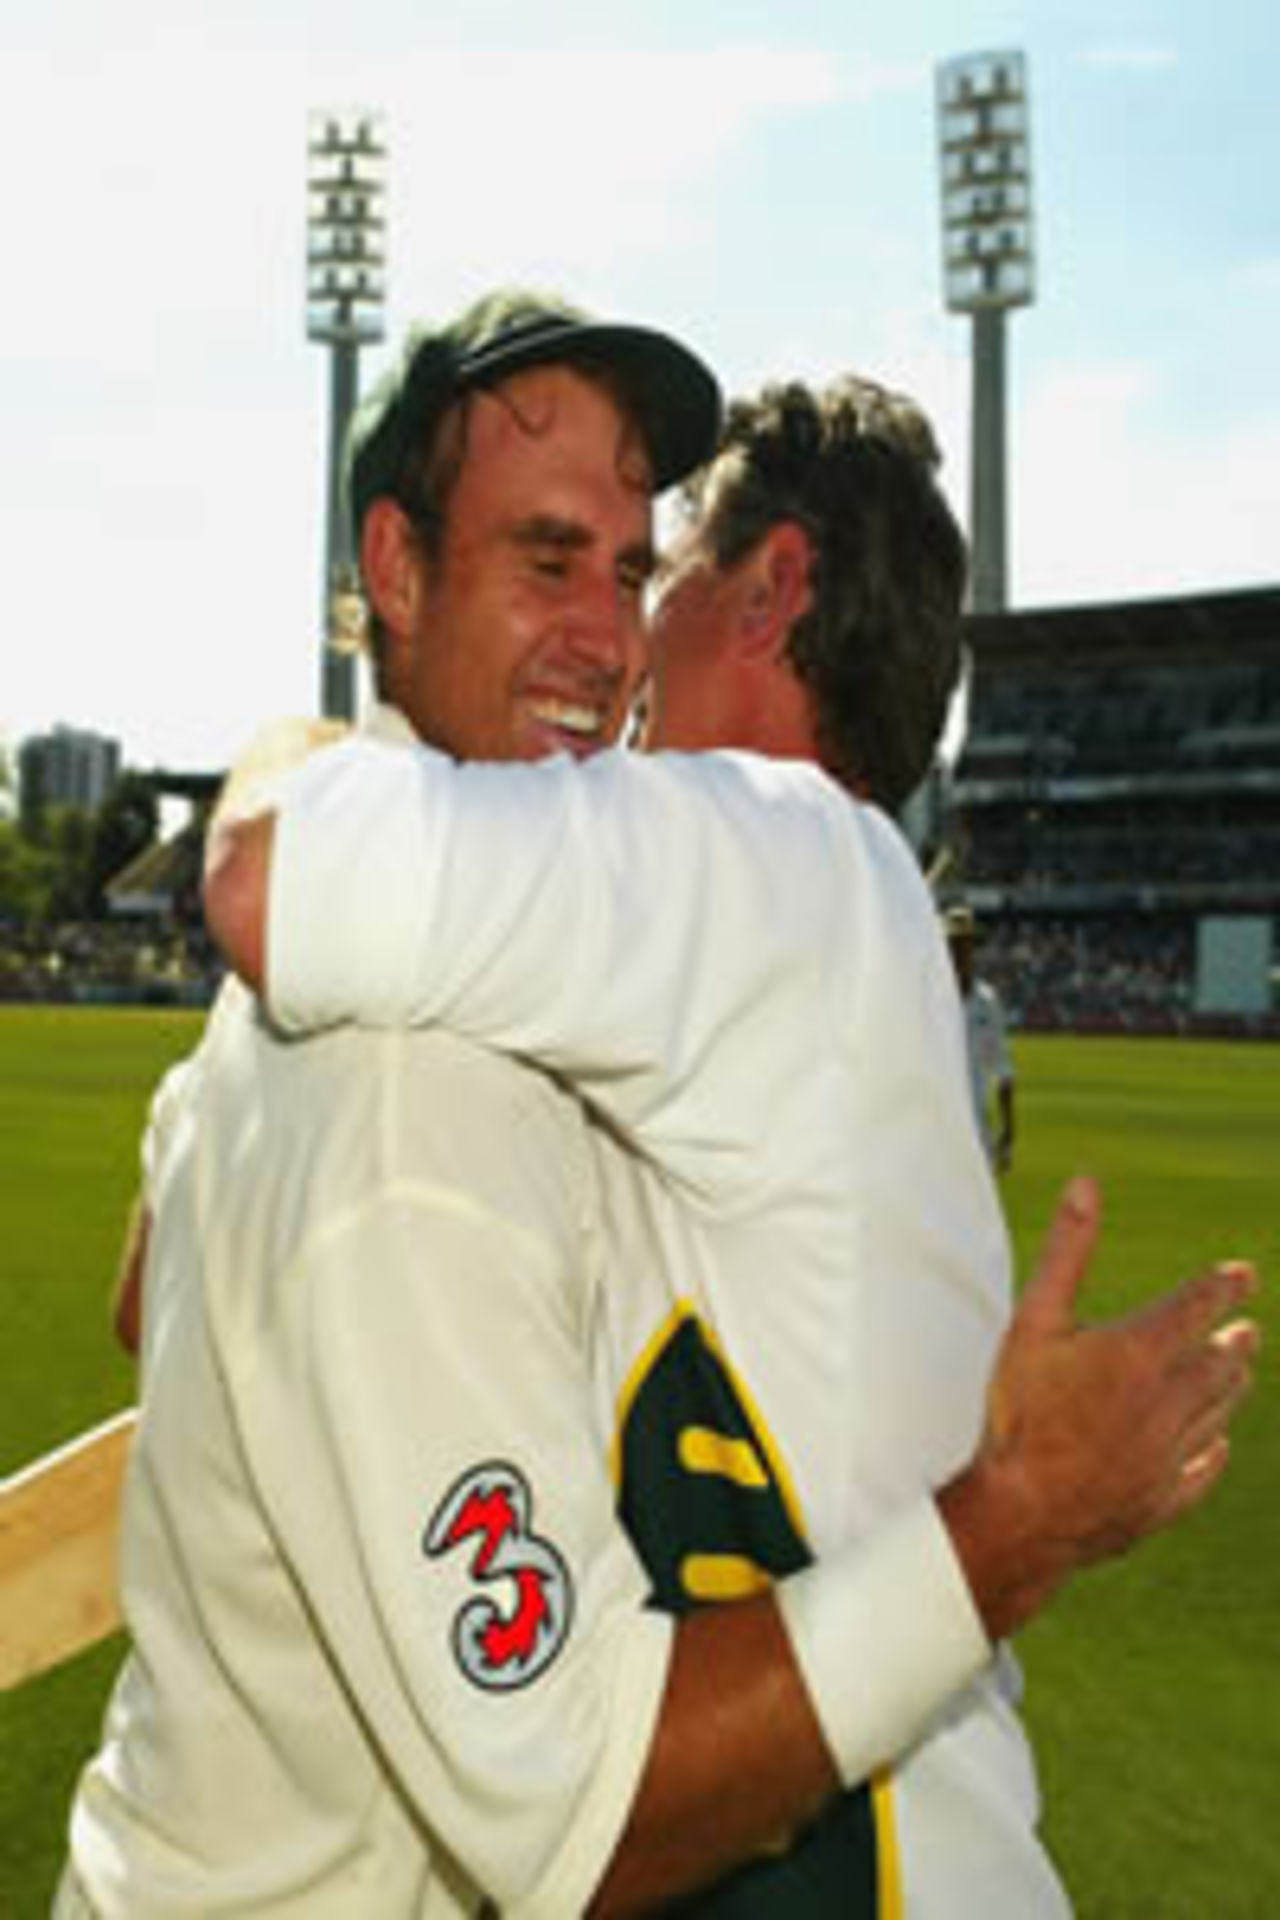 Matthew Hayden of Australia is congratulated by physio Errol Alcott after breaking Brian Lara of The West Indies world record of 375 during day two of the First Test between Australia and Zimbabwe played at the WACA Ground on October 10, 2003 in Perth, Australia.